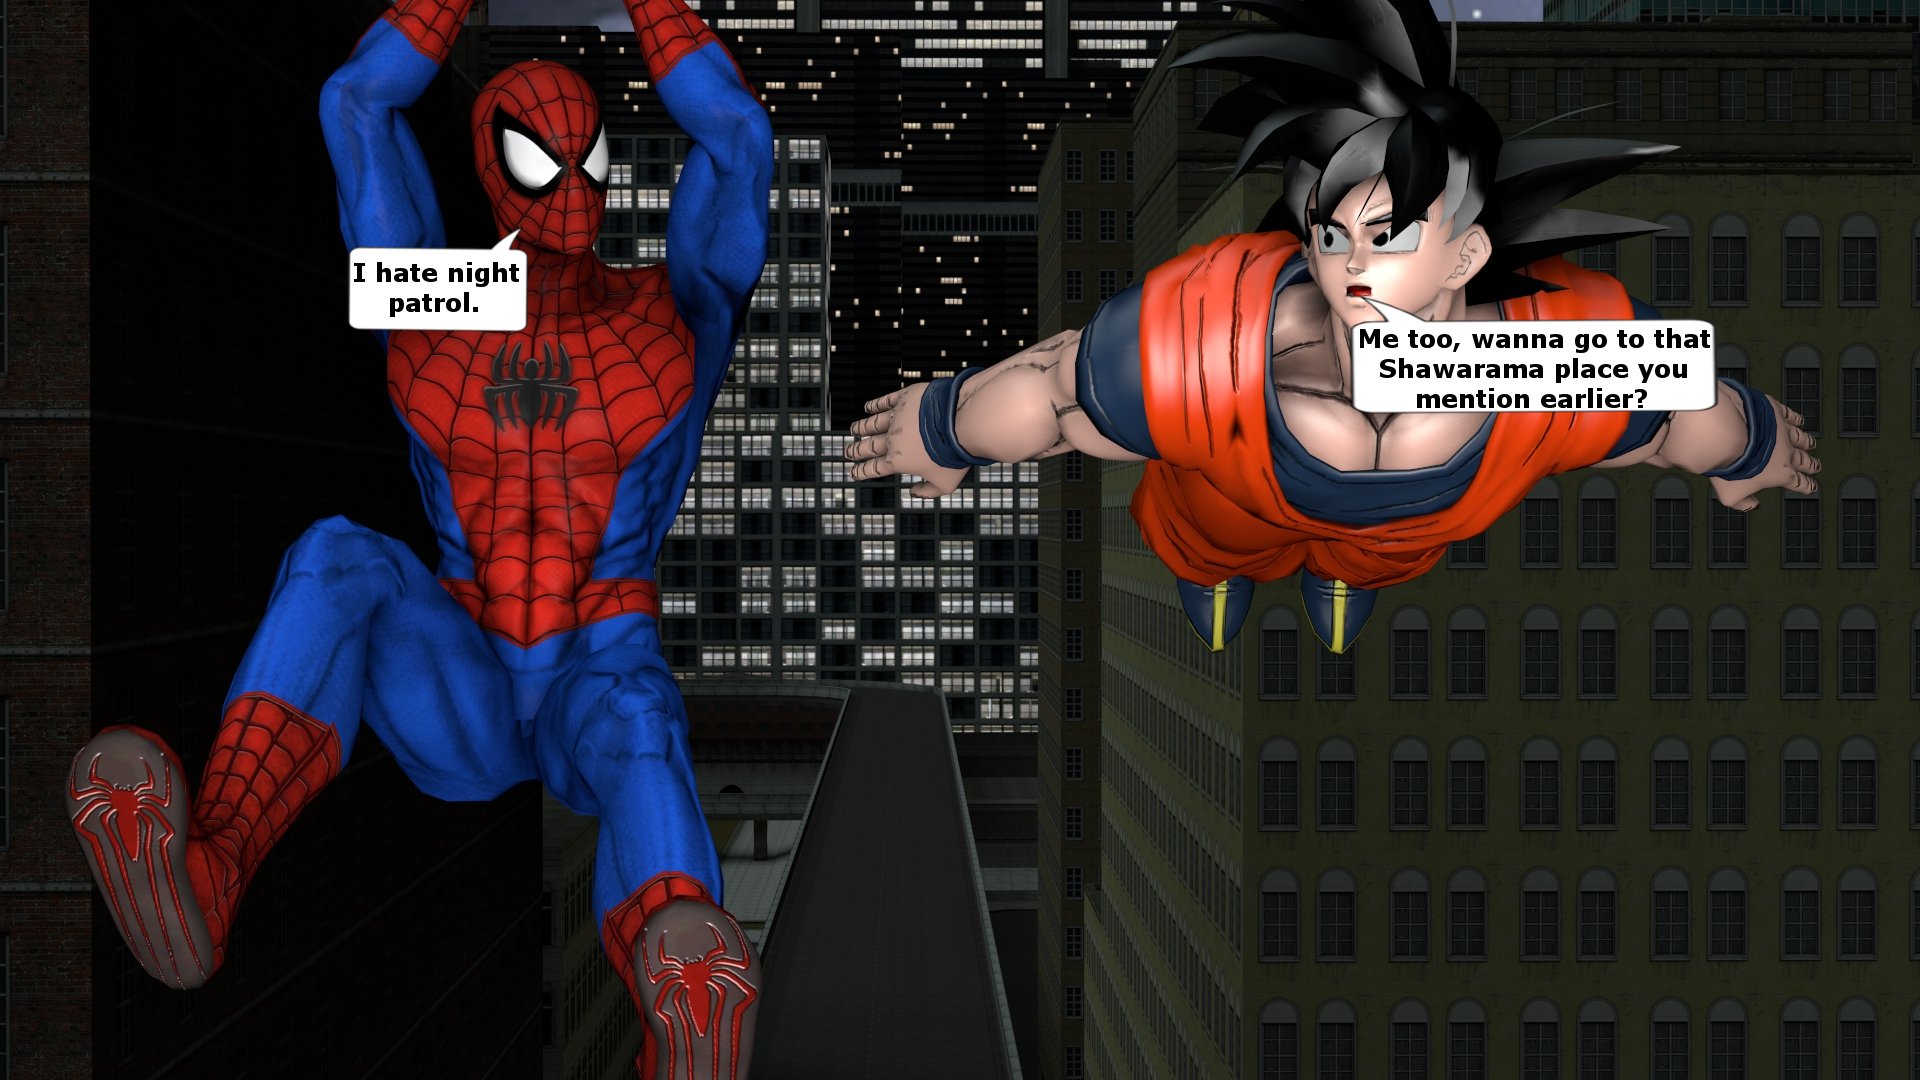 Spider-Man and Goku searching for crime by kongzillarex619 on DeviantArt